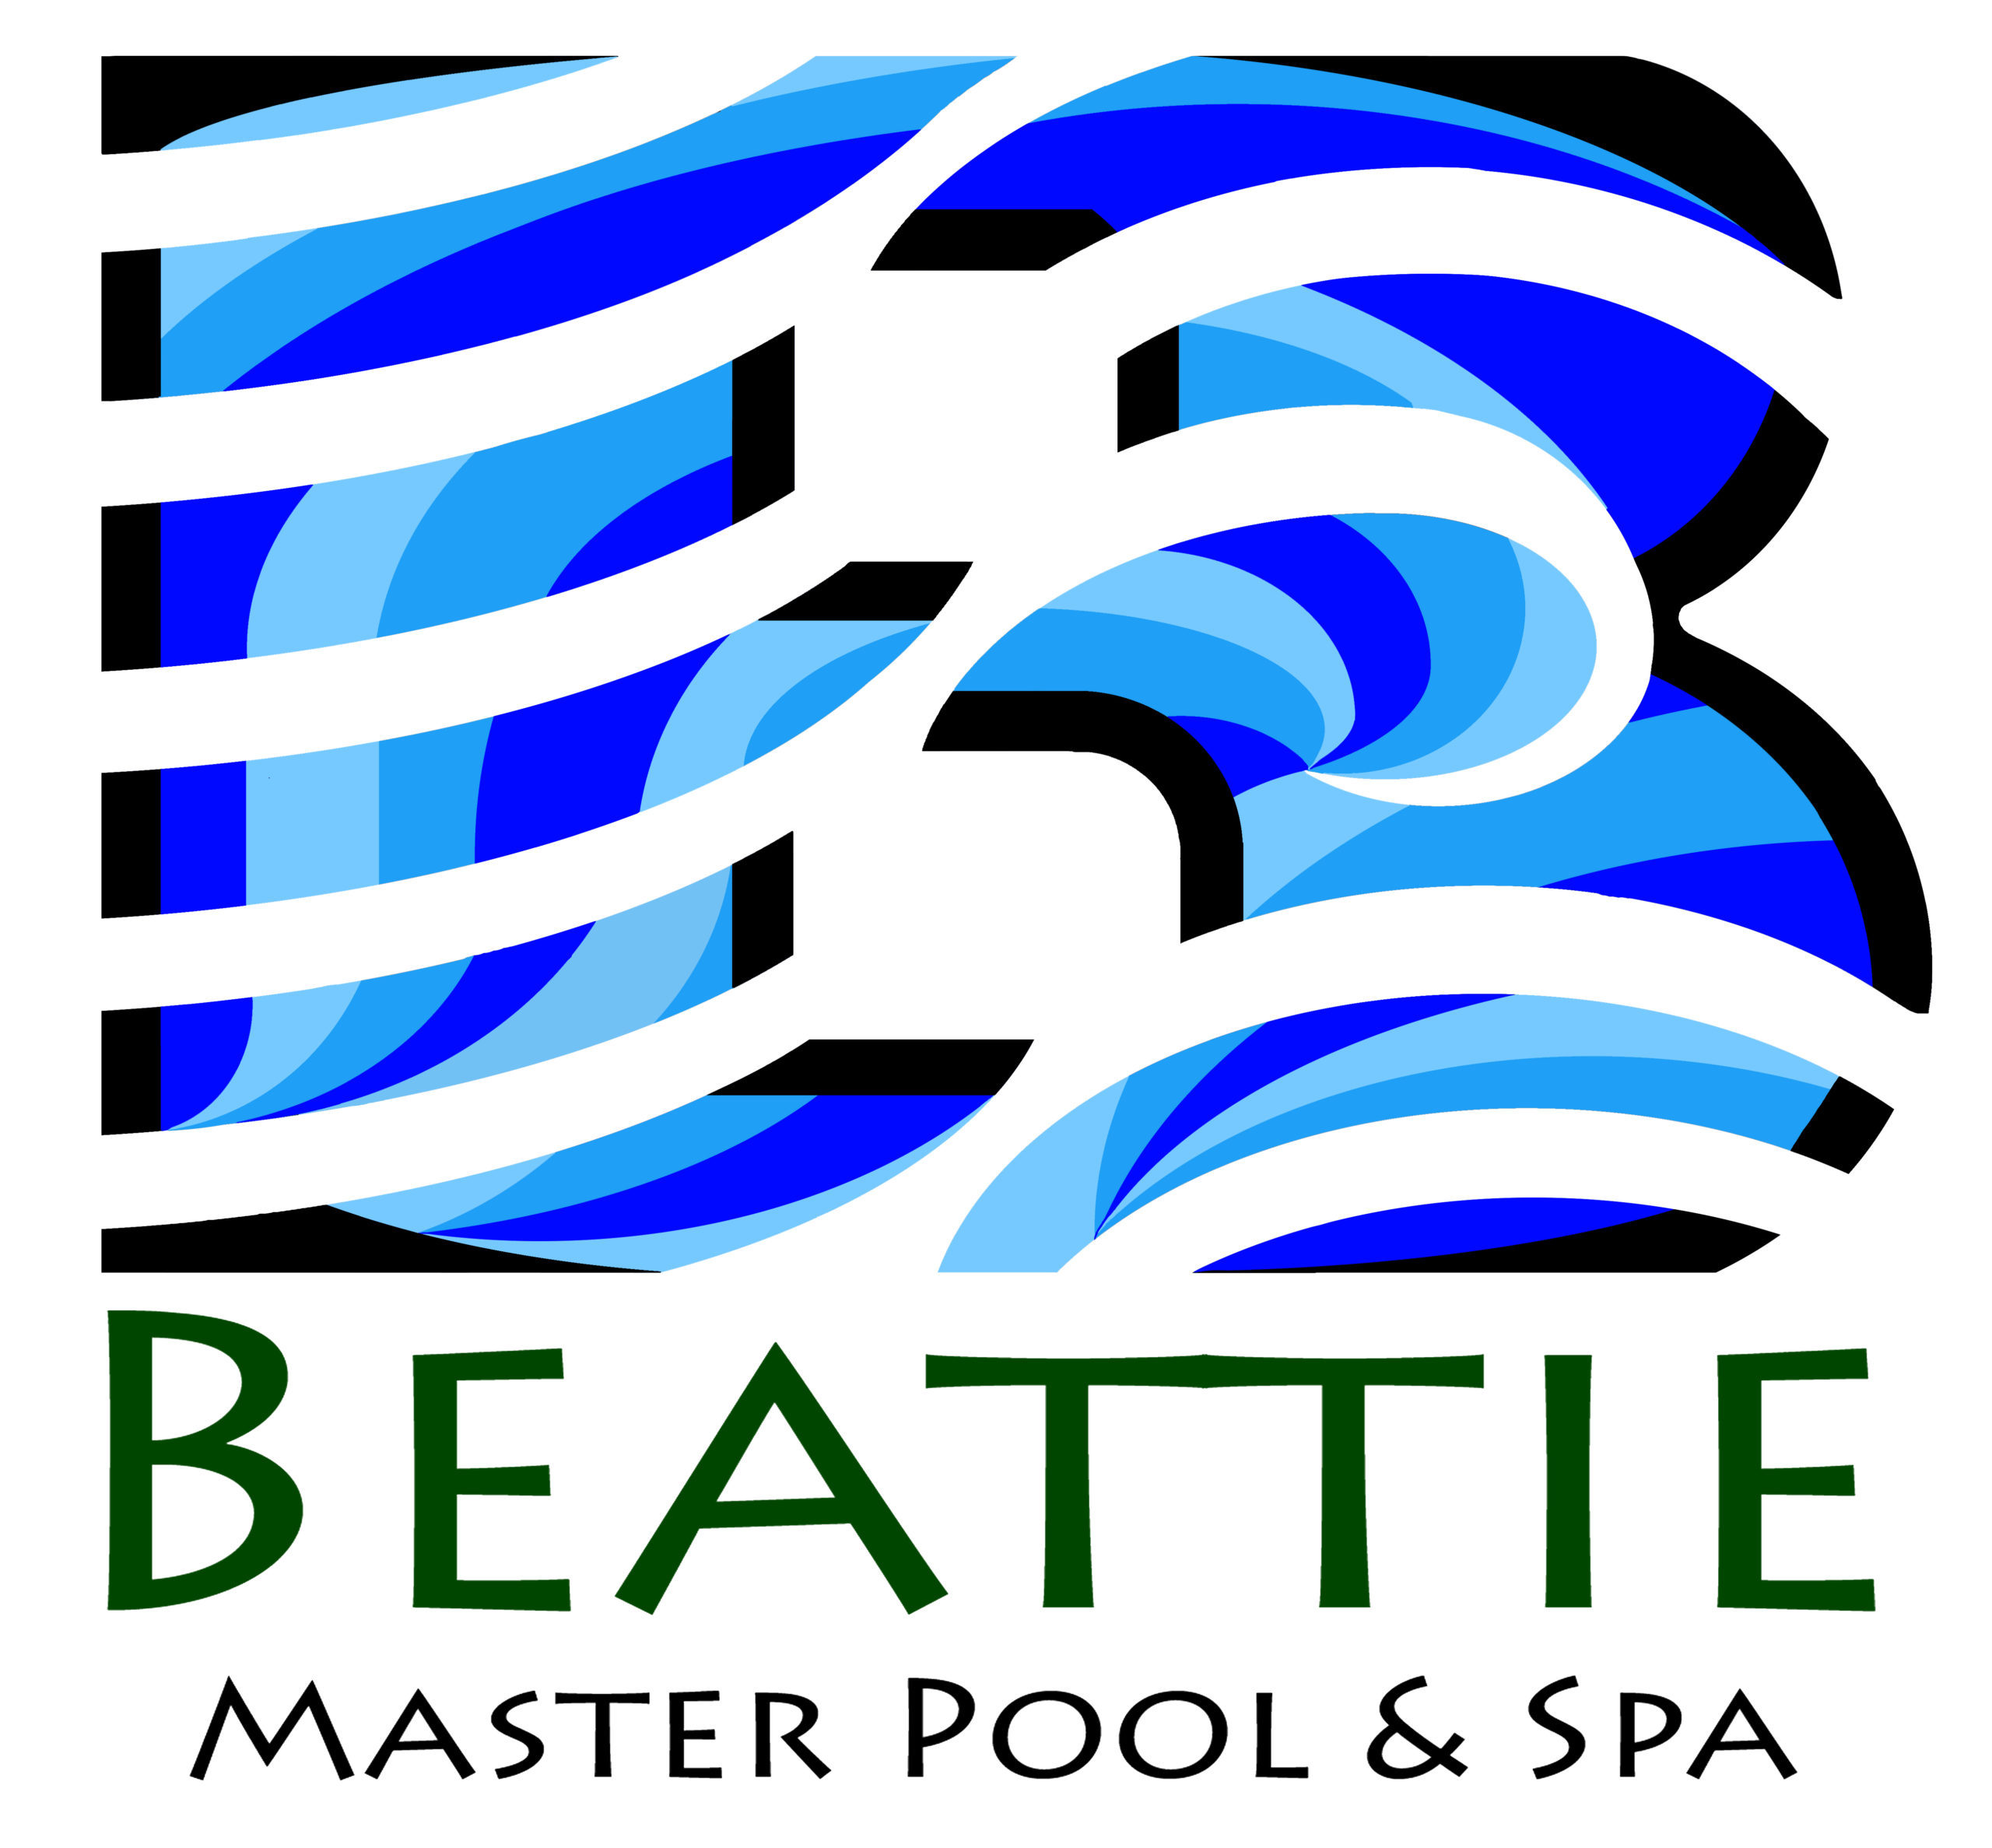 Beattie Master Pools and Spa